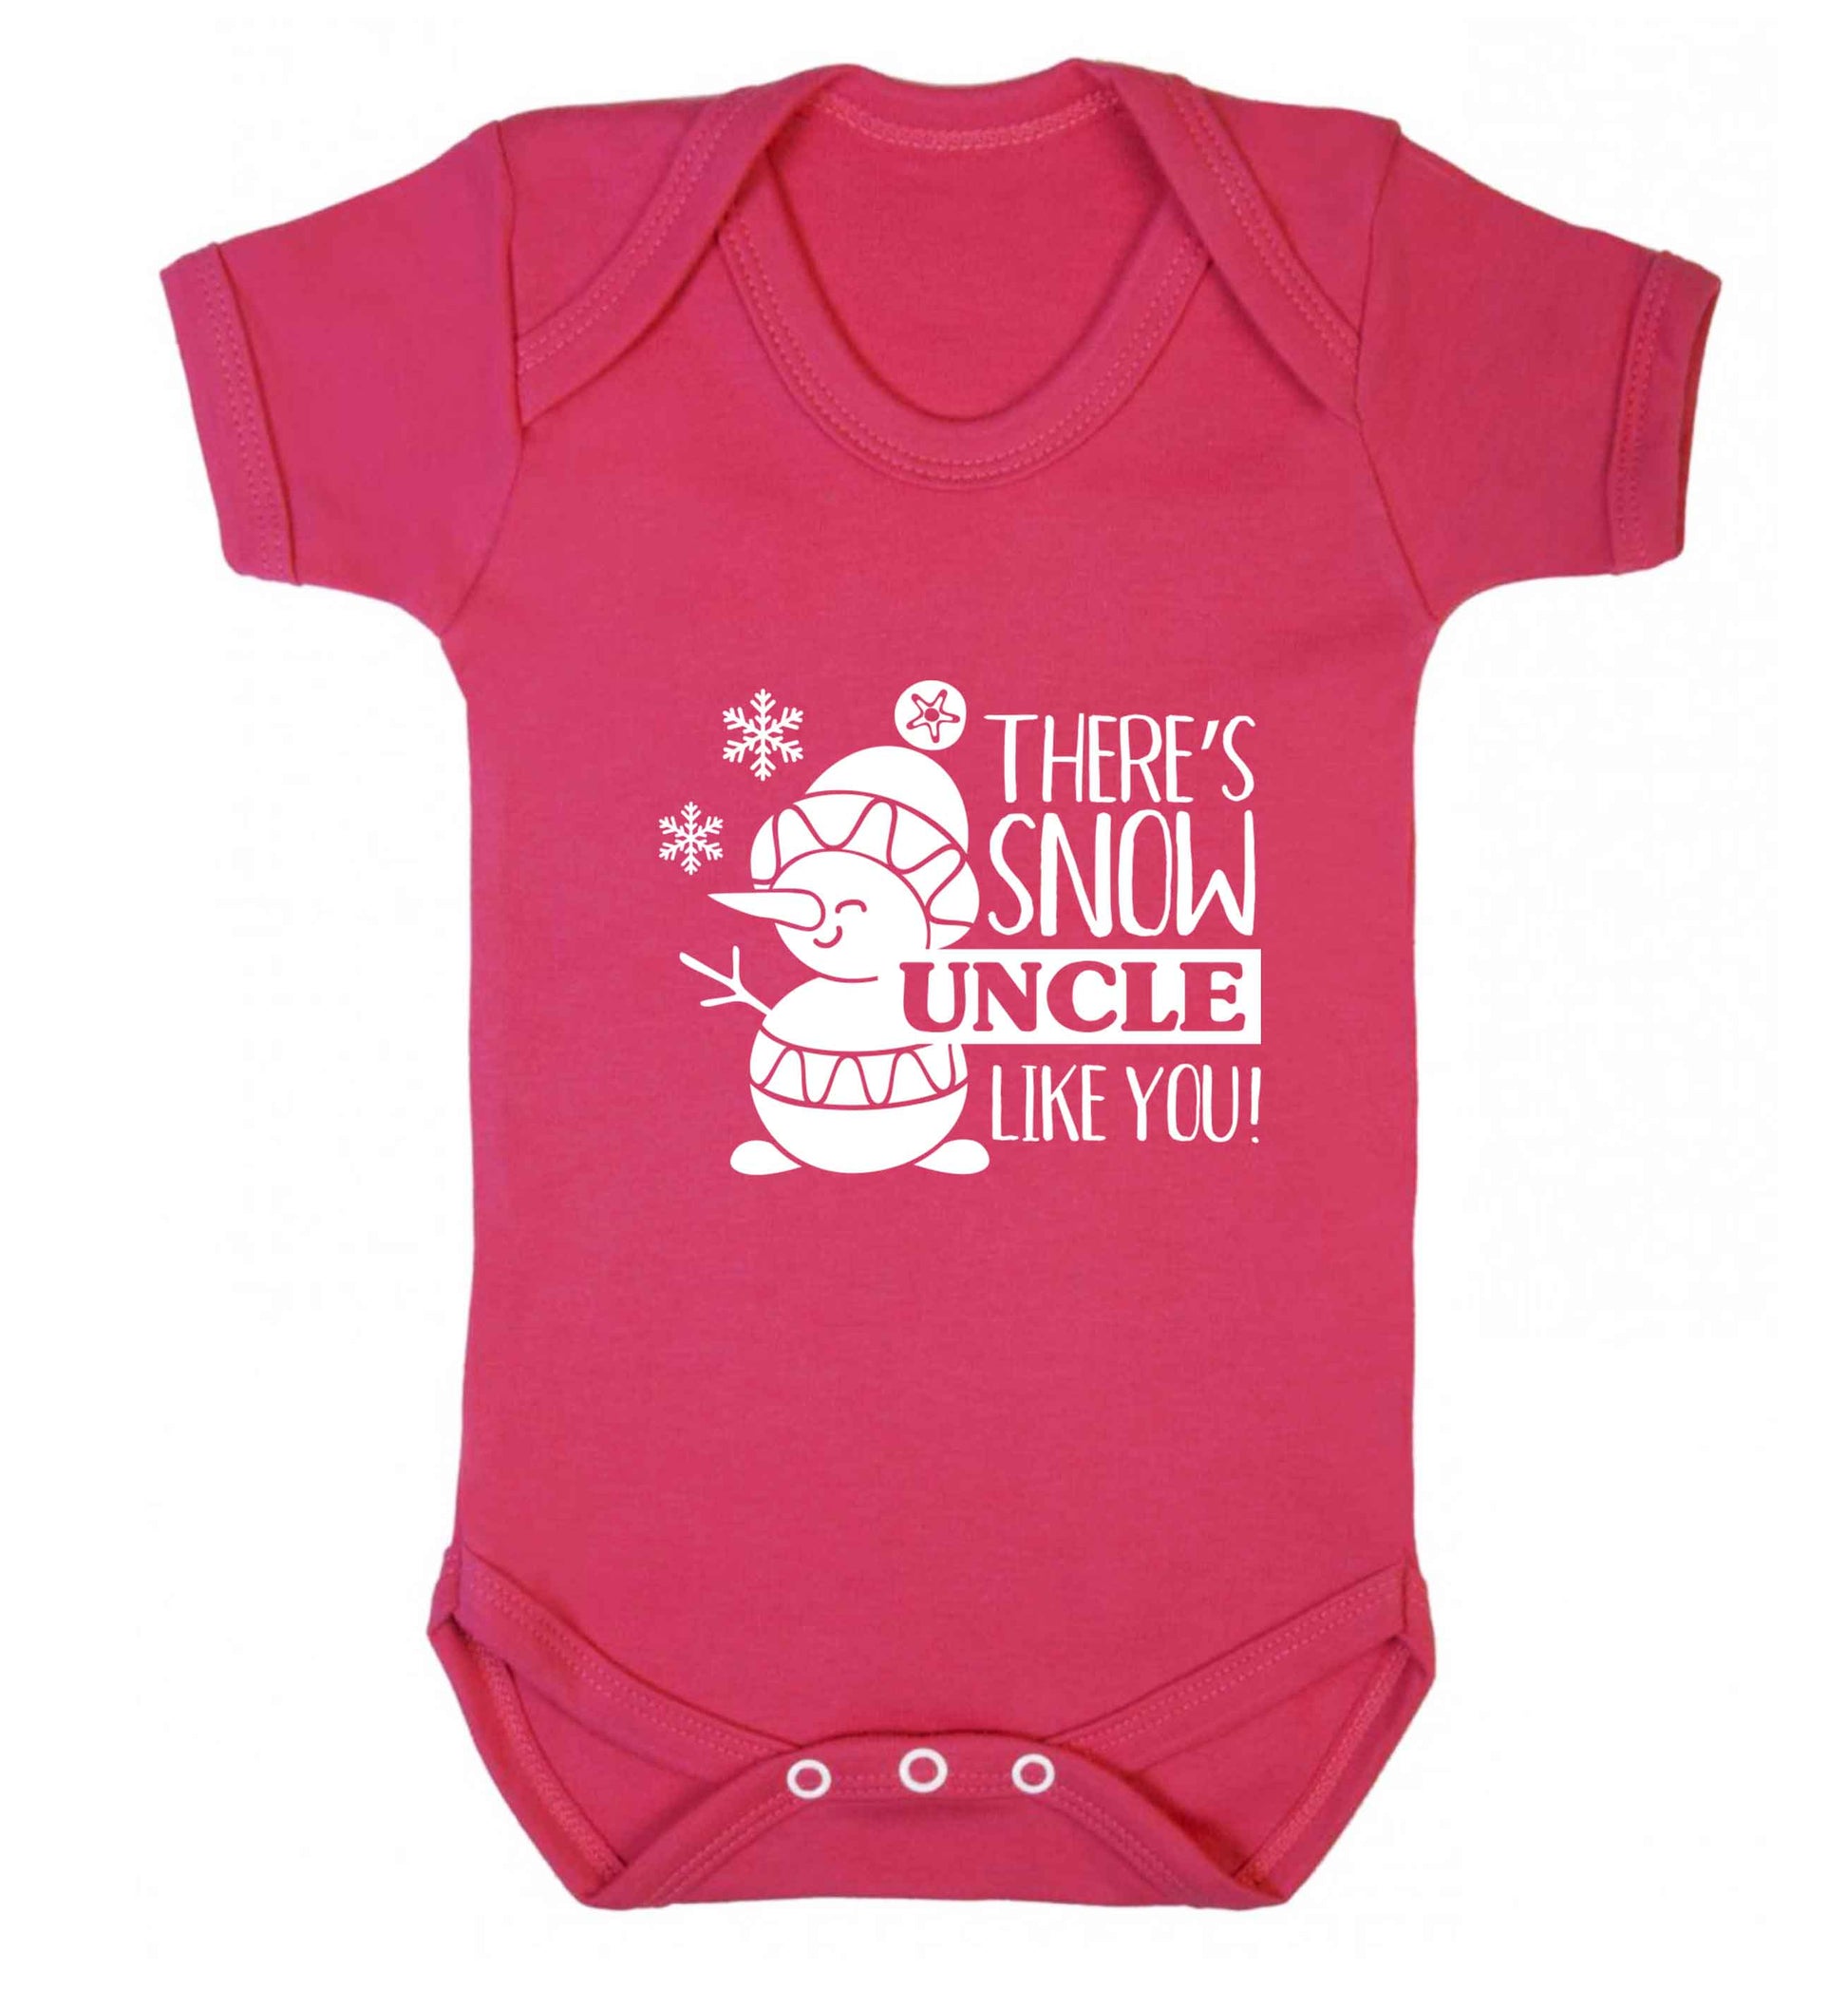 There's snow uncle like you baby vest dark pink 18-24 months